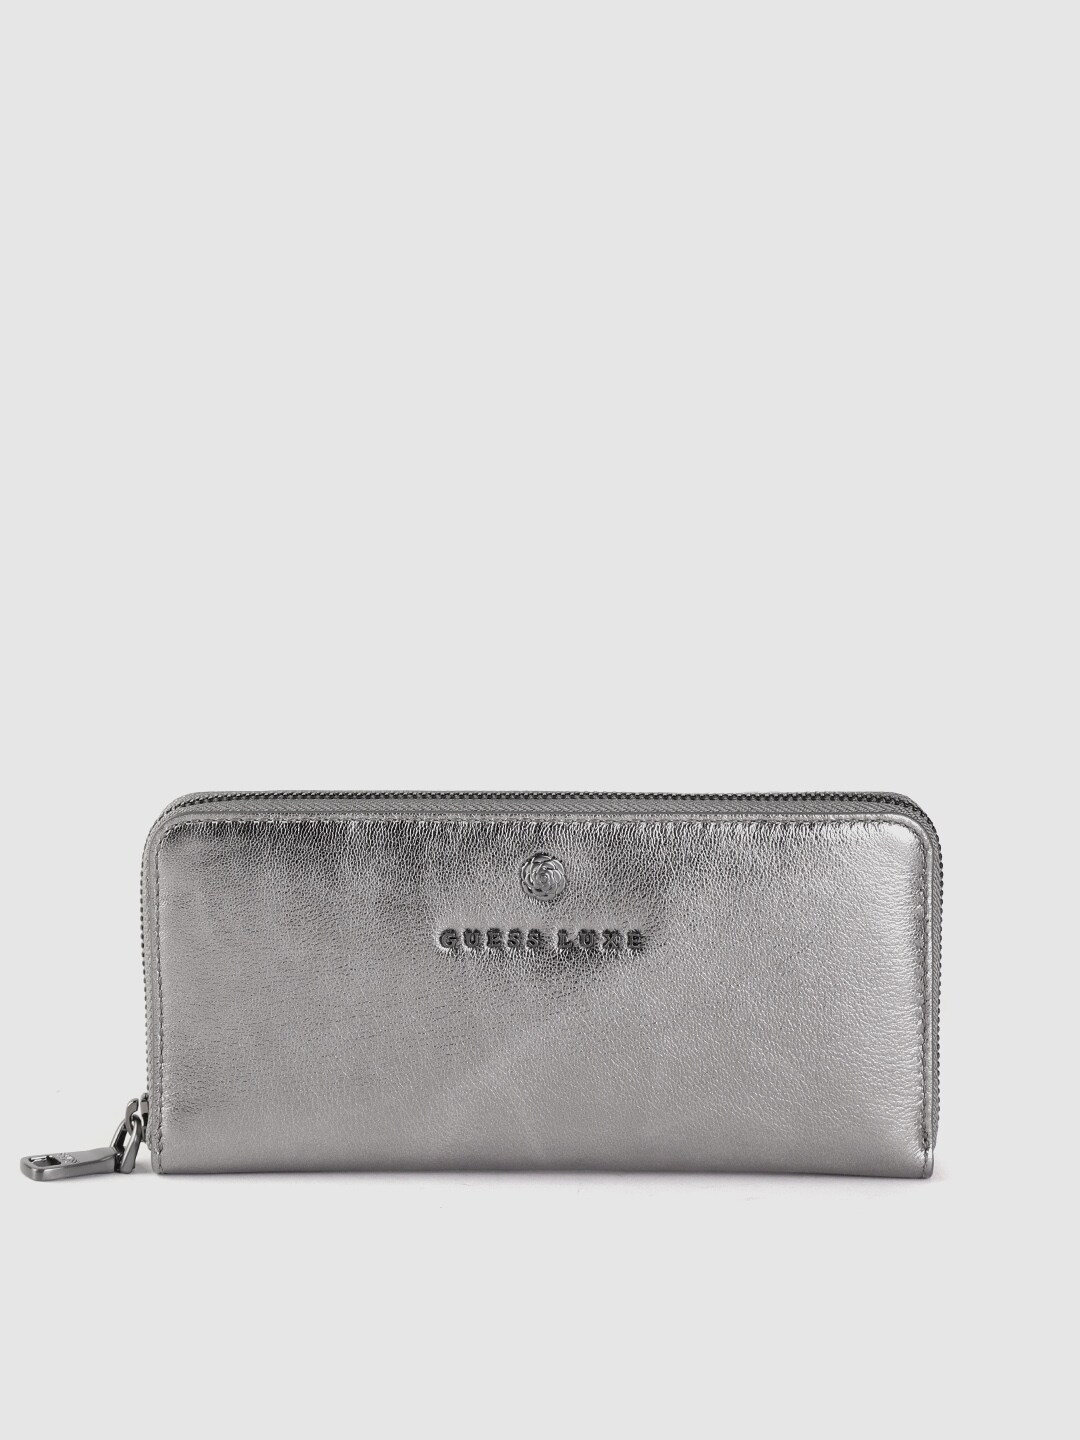 GUESS Women Silver-Toned Solid Zip Around Wallet Price in India